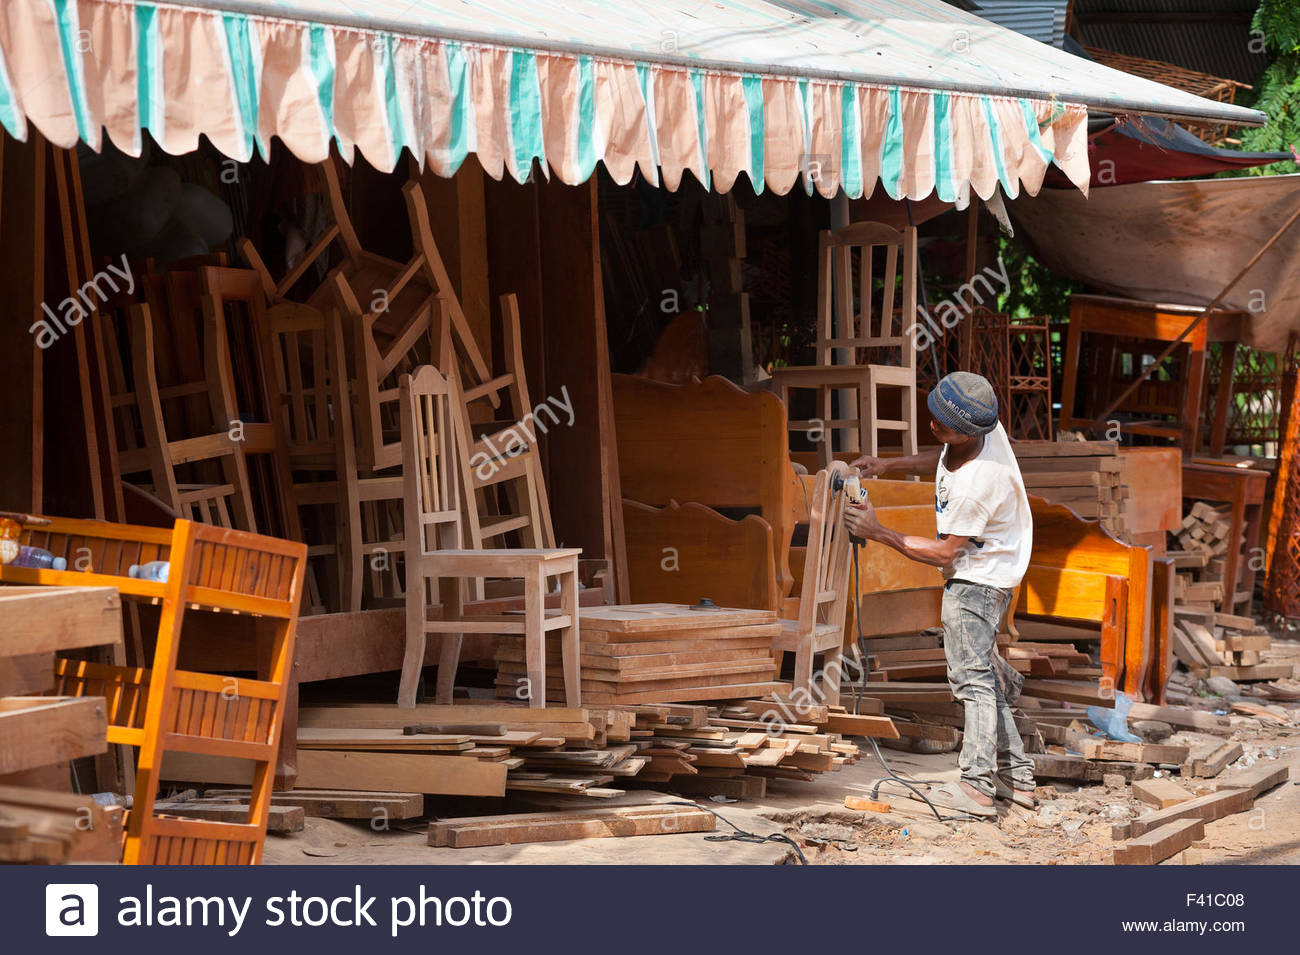 Cambodian Cabinet Maker At Work Stock Photo 88541832 Alamy